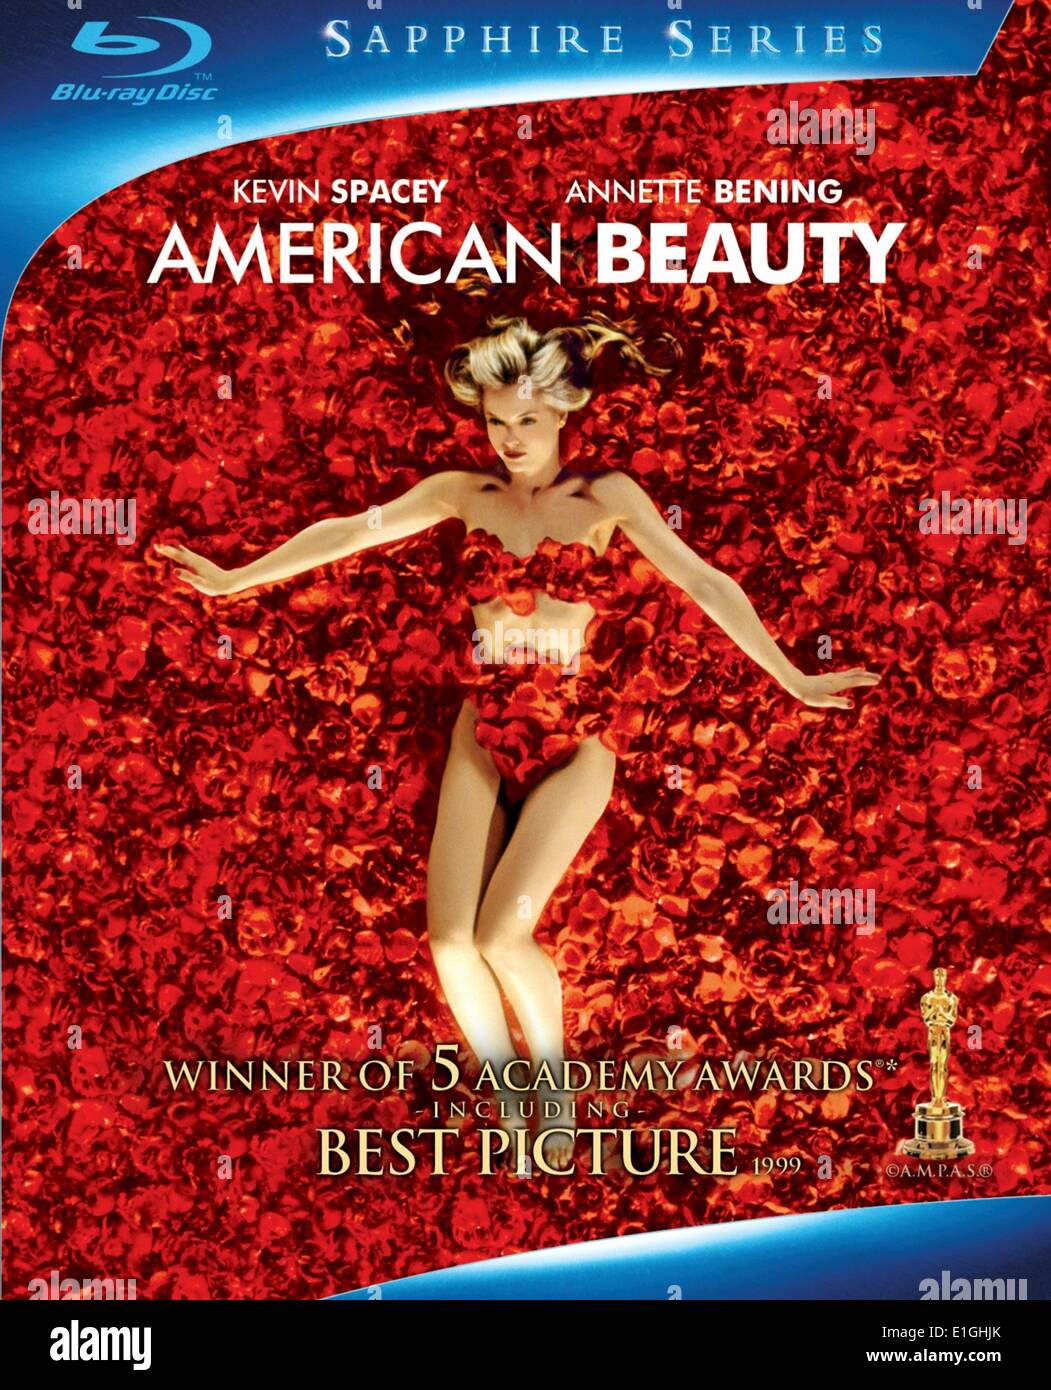 American Beauty starring Kevin Spacey and Annette Bening a 1999 American drama film. Stock Photo